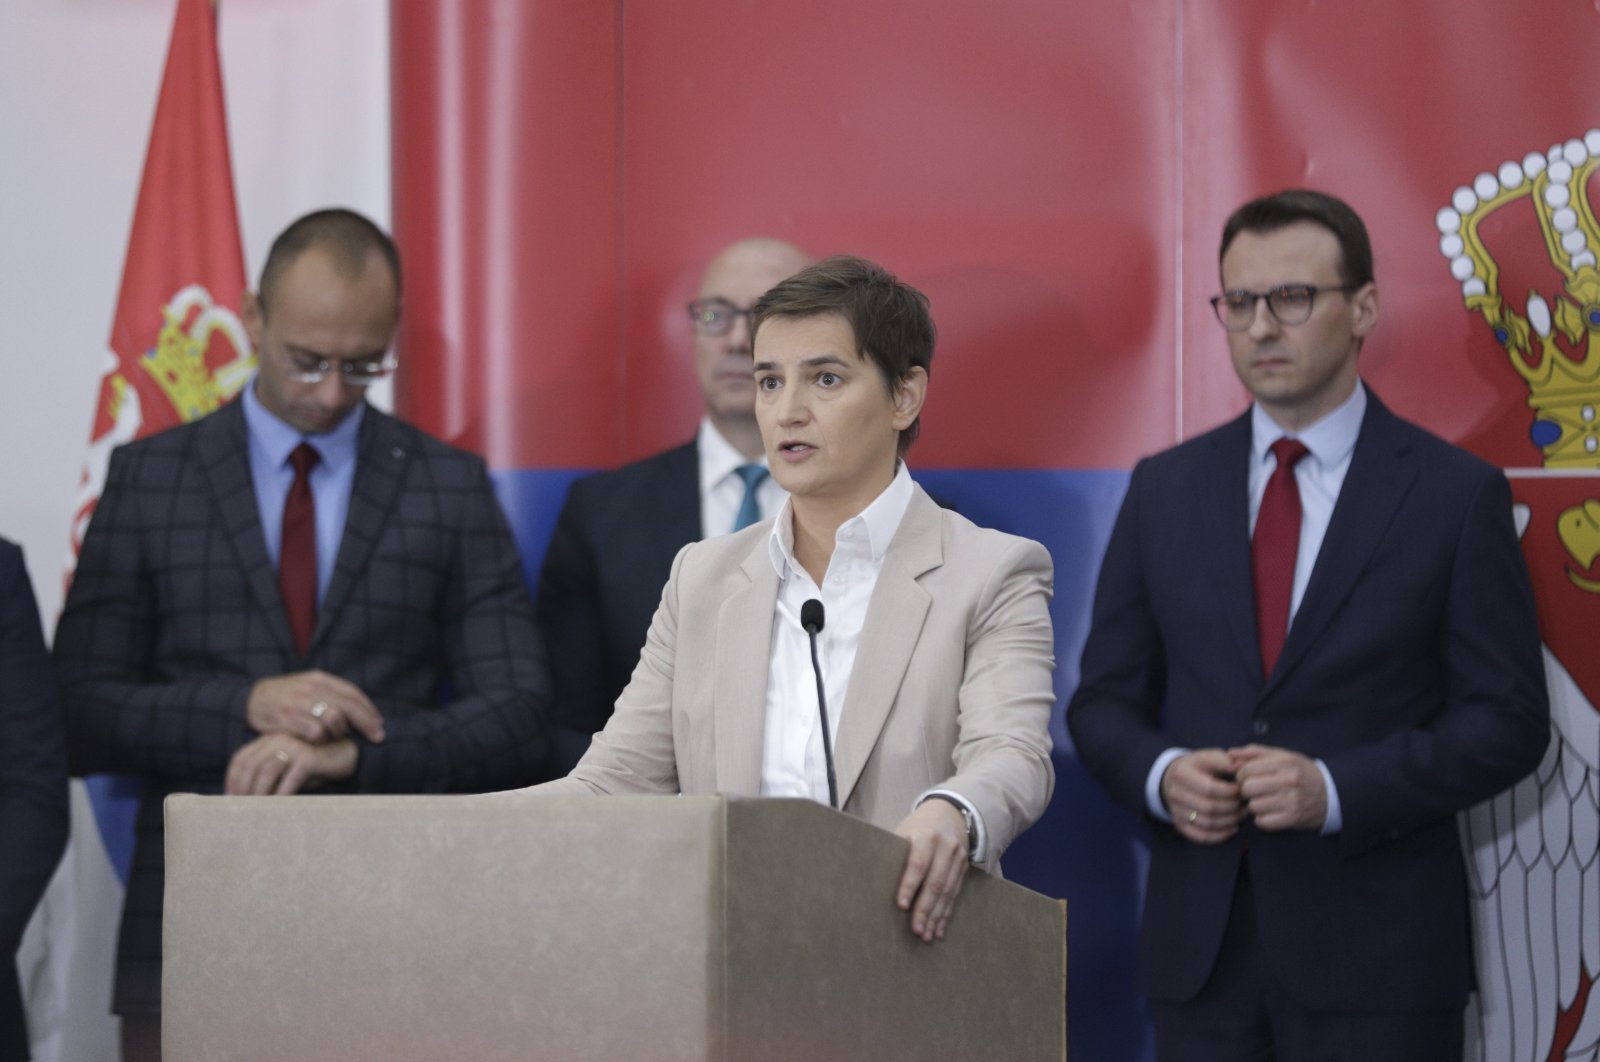 Serbia&#039;s Prime Minister Ana Brnabic (C) speaks during her visit to the northern, Serb-dominated part of the ethnically divided town of Mitrovica, in Kosovo, Sept. 5, 2022. (EPA Photo)